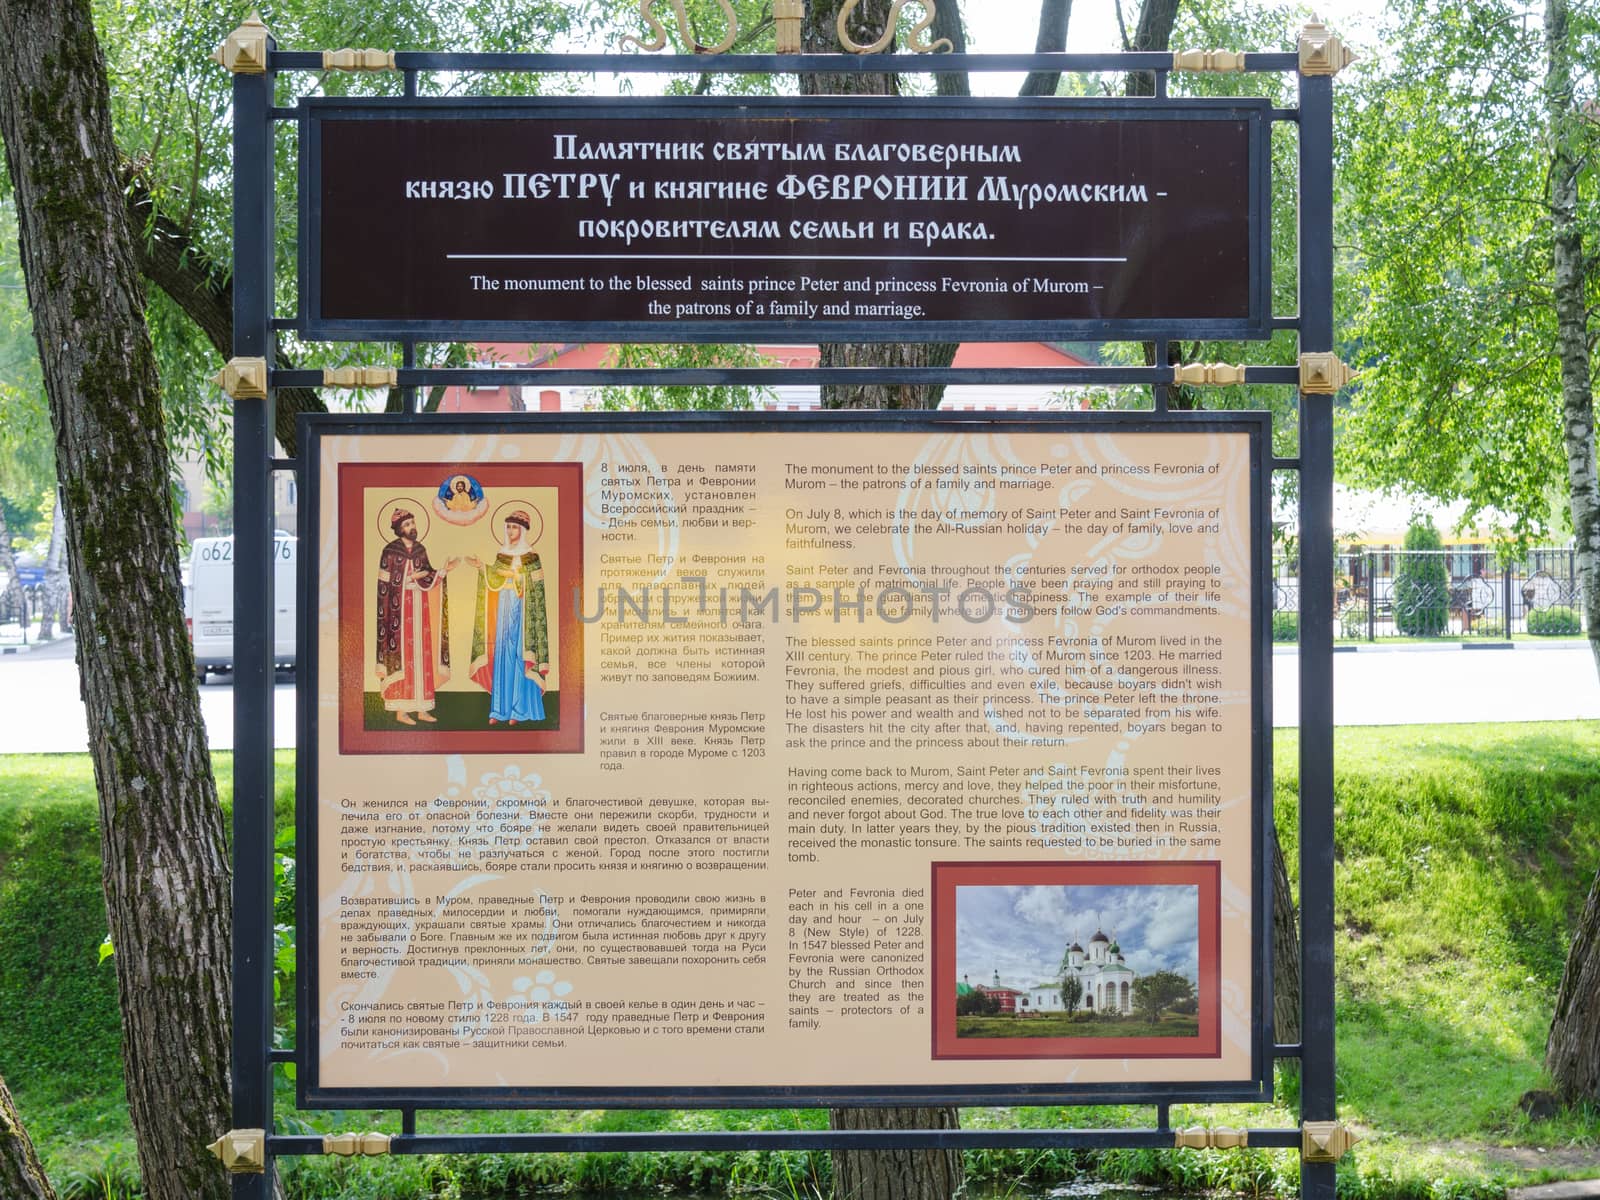 Sergiev Posad - August 10, 2015: Information sign at the twentieth sculpture dedicated to the Holy Prince Petr and Princess Fevronia Murom installed in Sergiev Posad